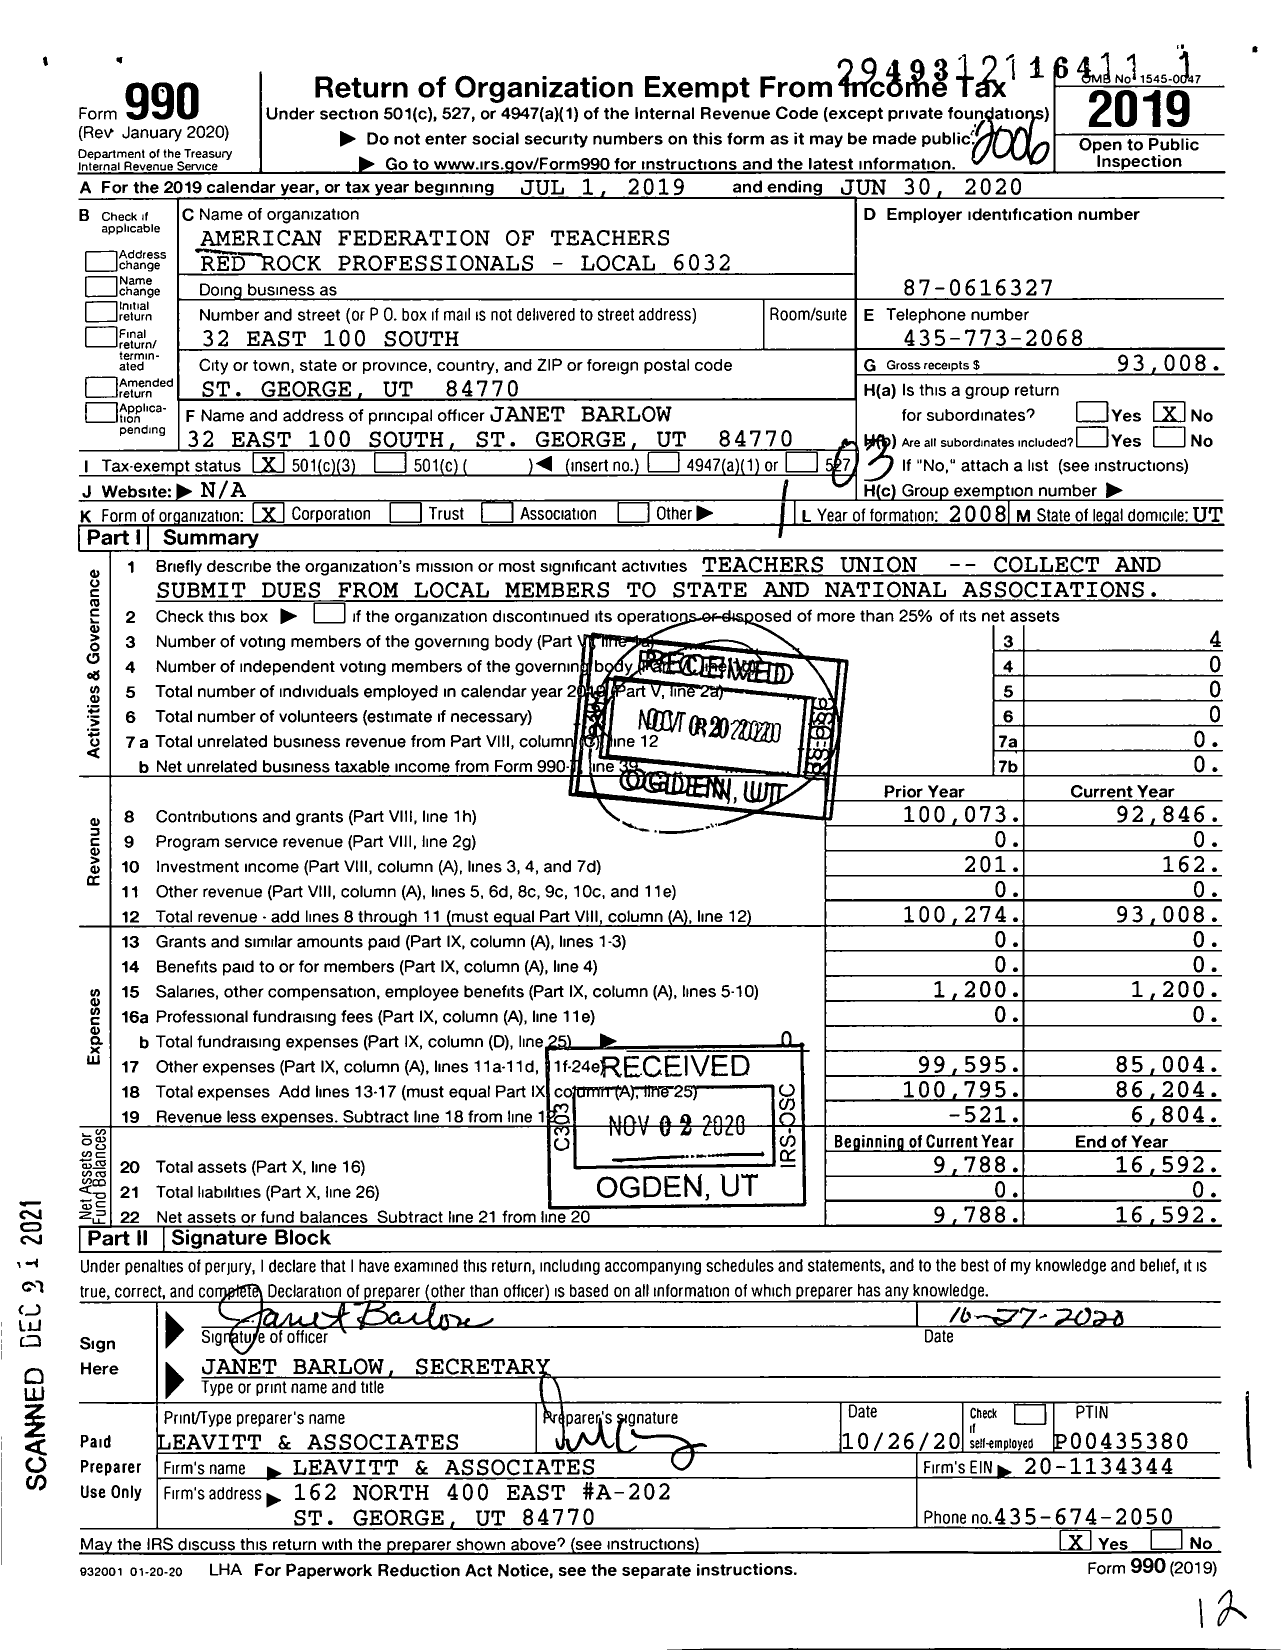 Image of first page of 2019 Form 990 for American Federation of Teachers - 6032 Red Rock Professionals